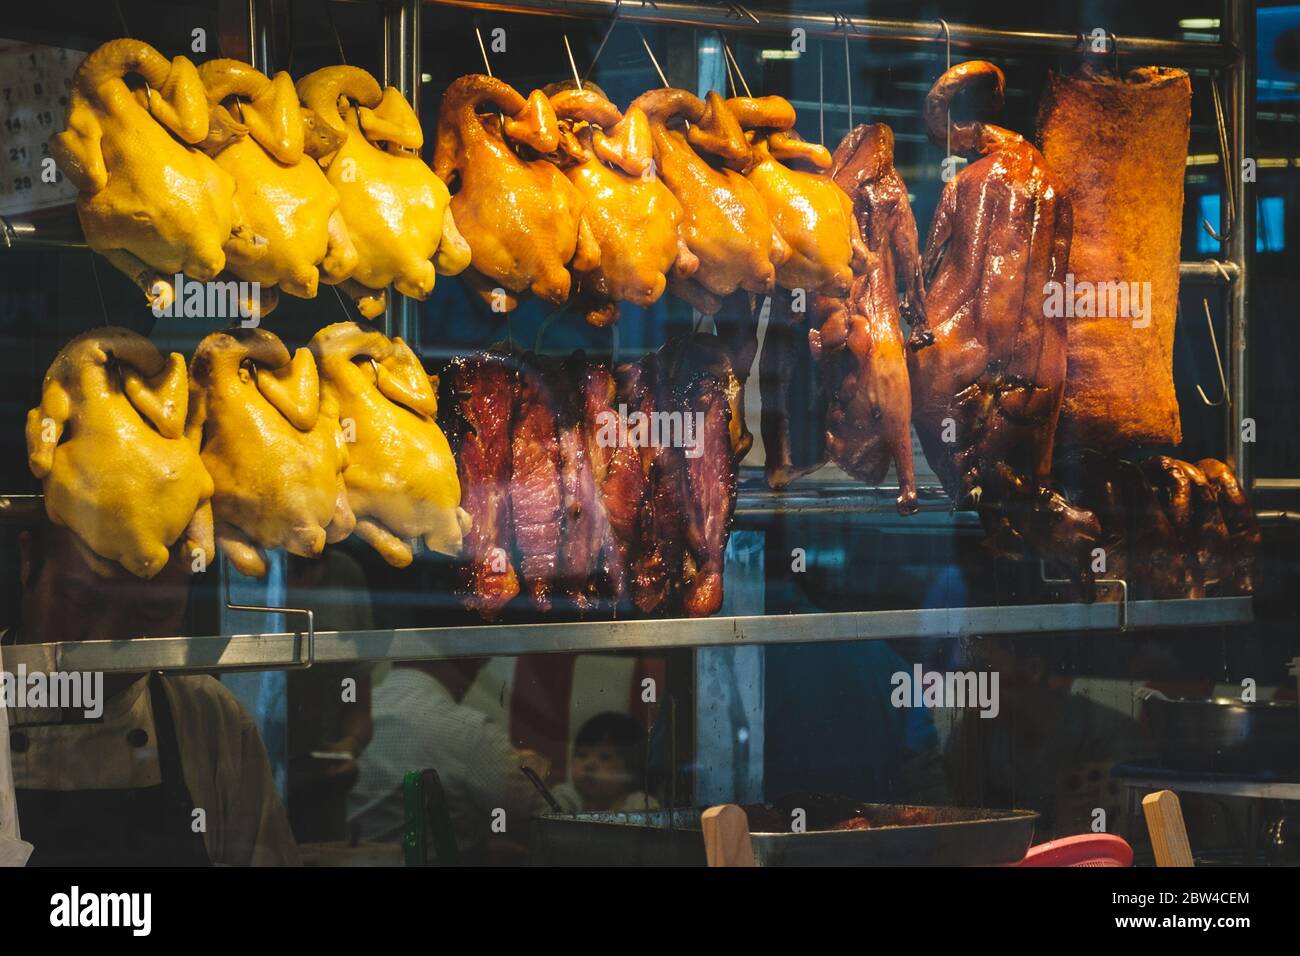 Hong Kong - November, 2019: Roasted ducks, peking duck and roast goose, a common picture in restaurant window of Hong Kong Stock Photo